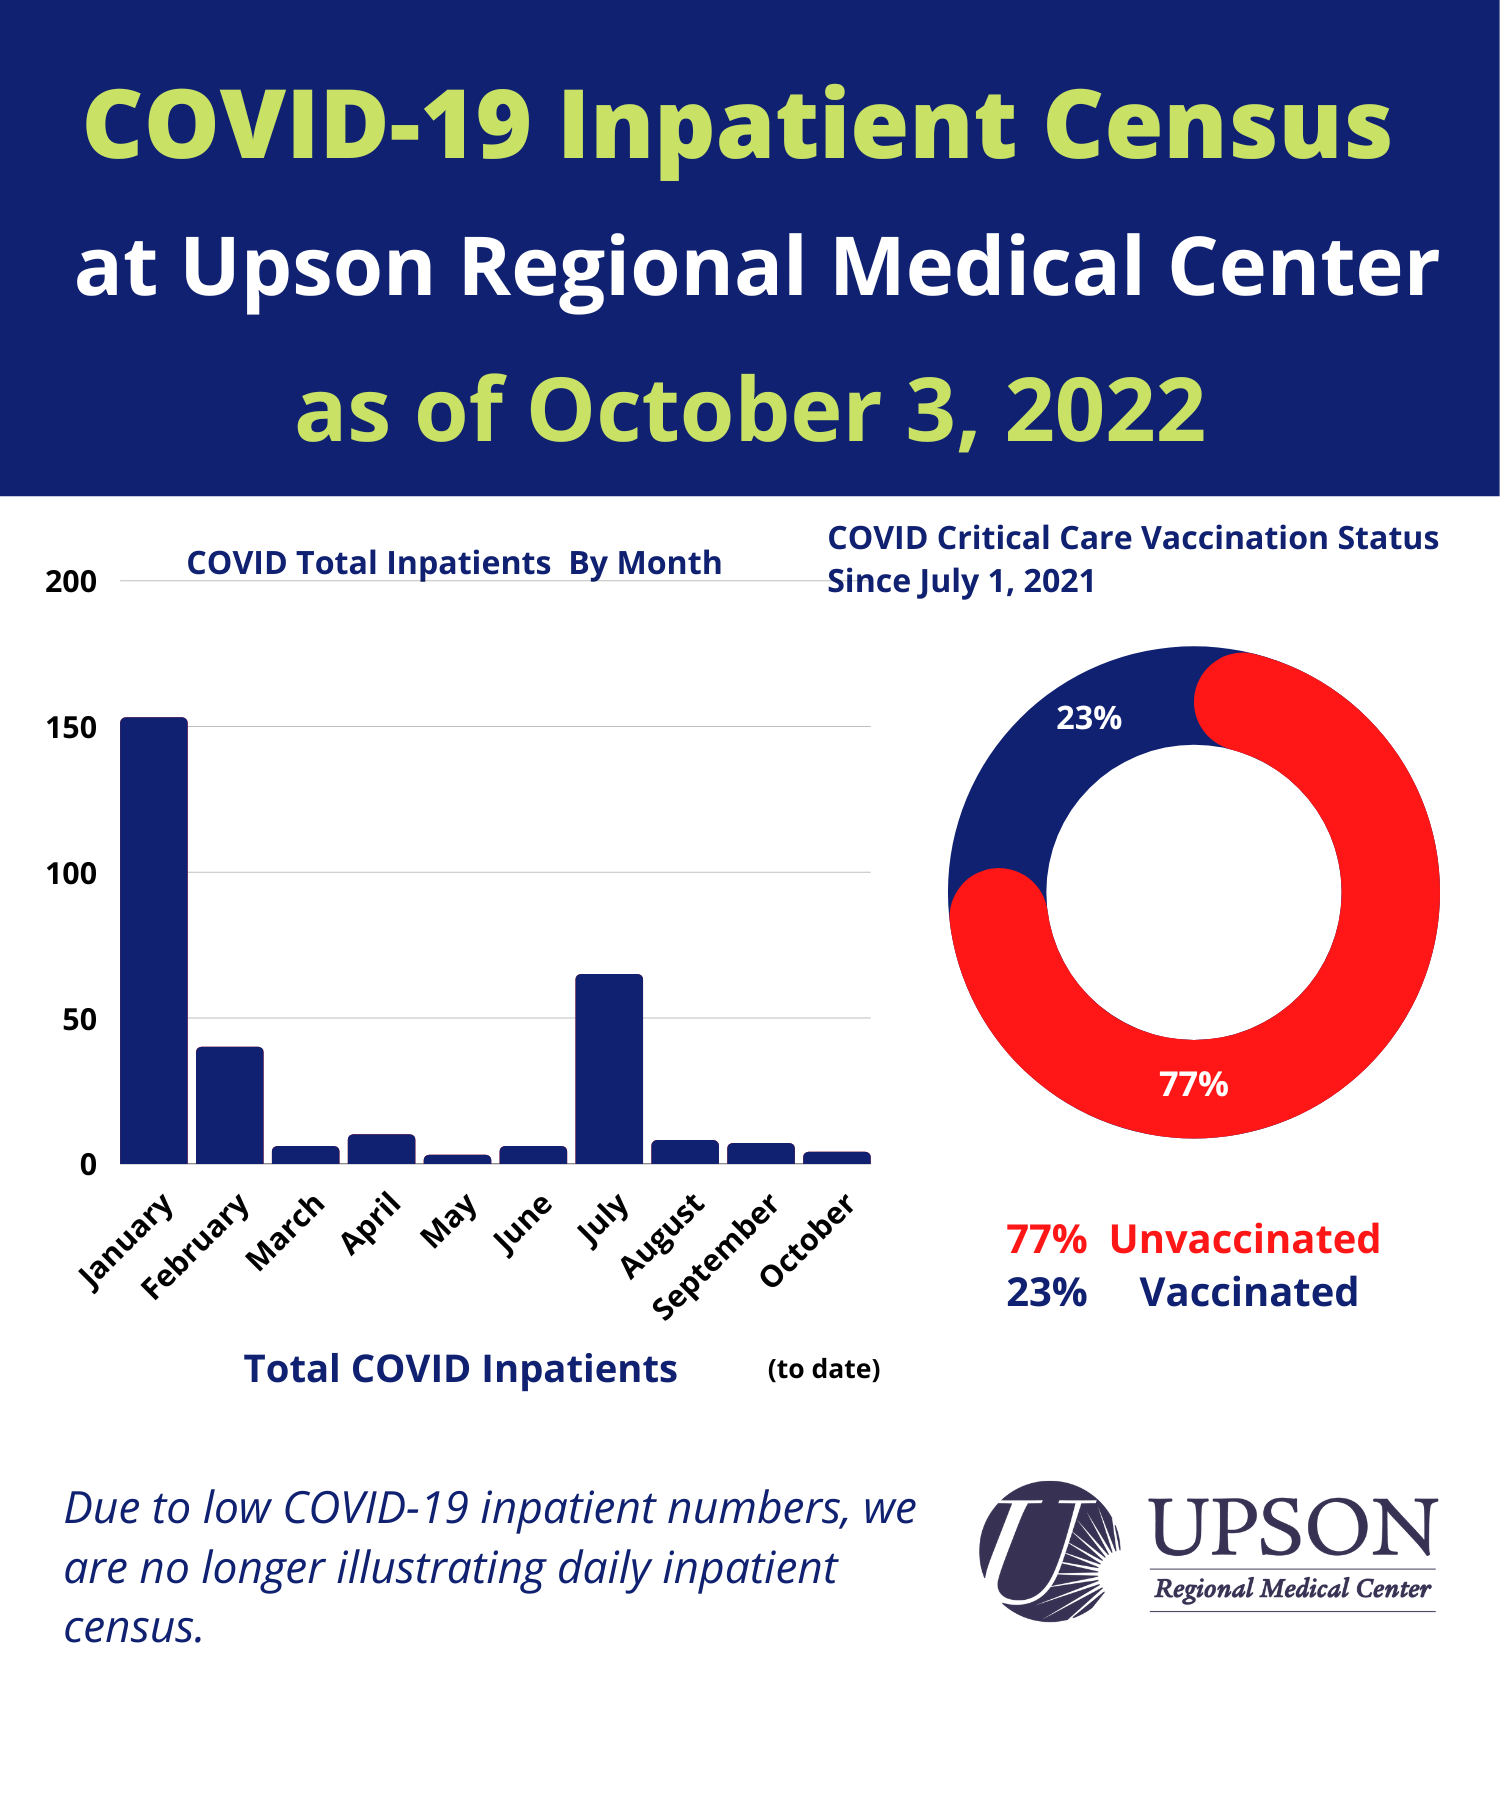 Photo for URMC COVID-19 Inpatient Census as of October 3, 2022